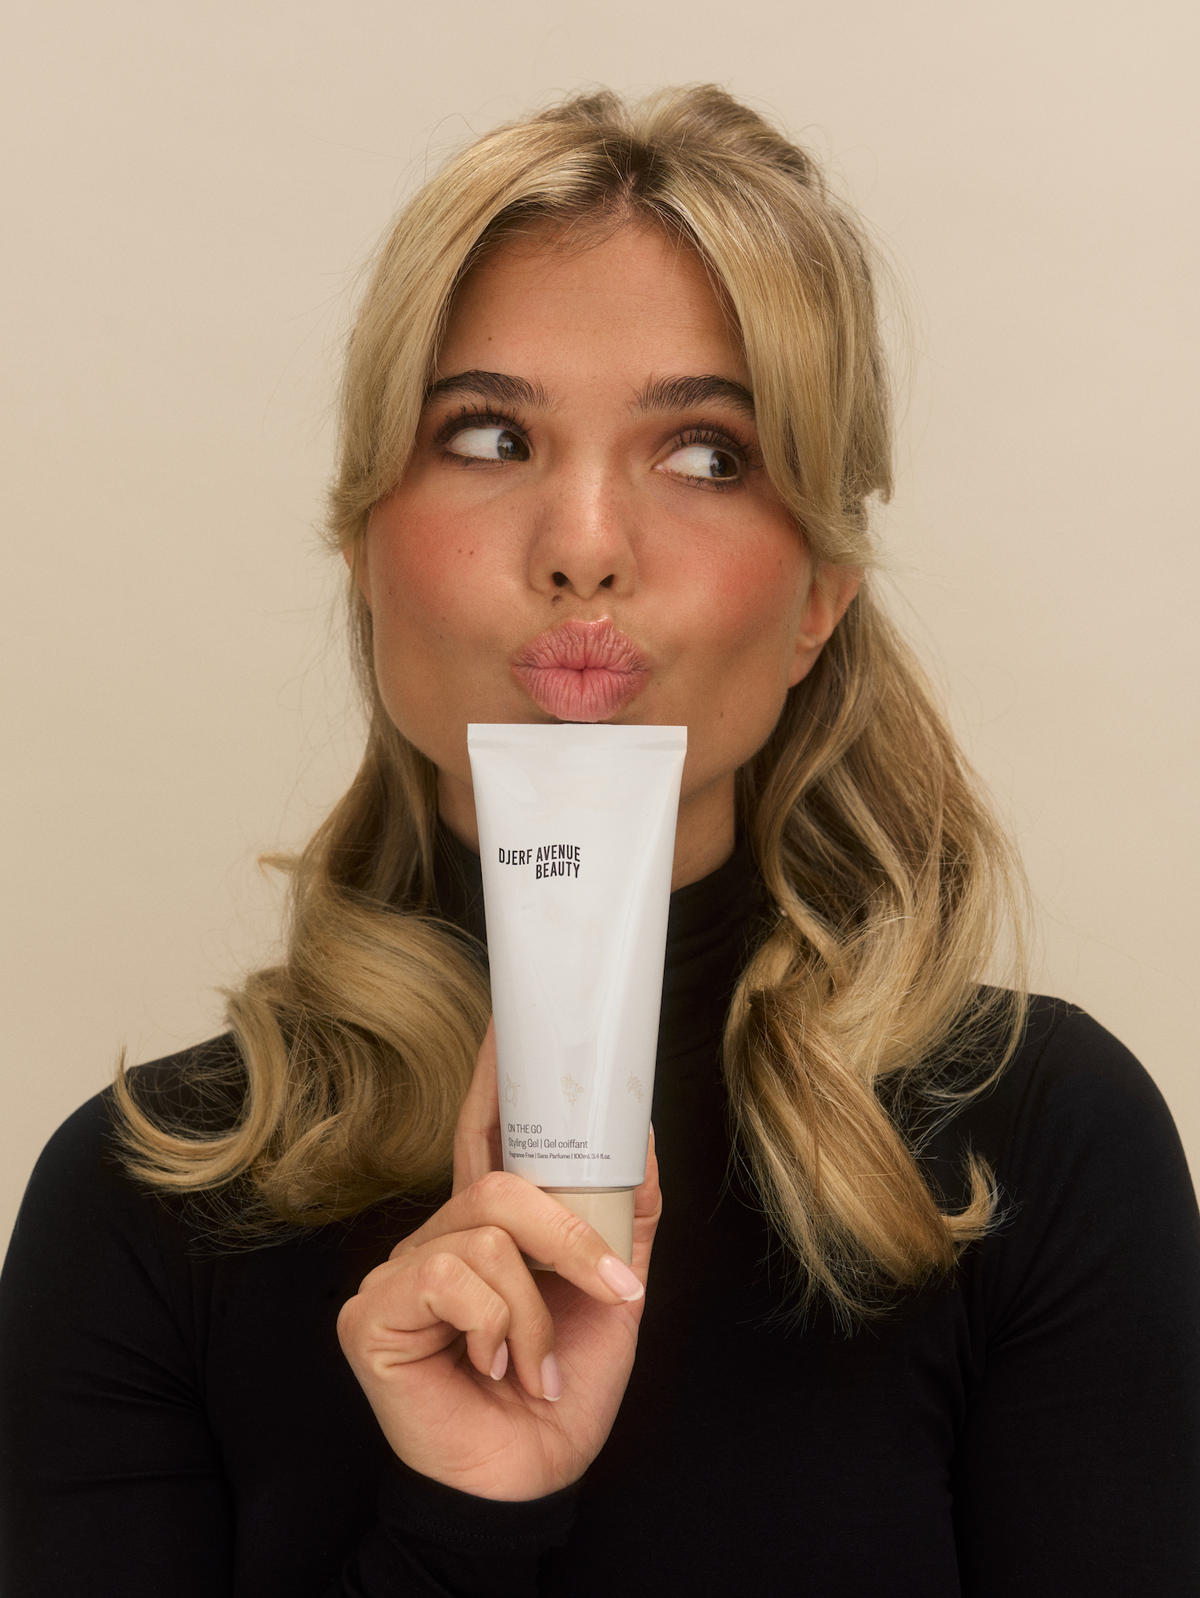 Djerf Avenue Beauty Review: 3 'Cosmo' Editors Tested for A Month